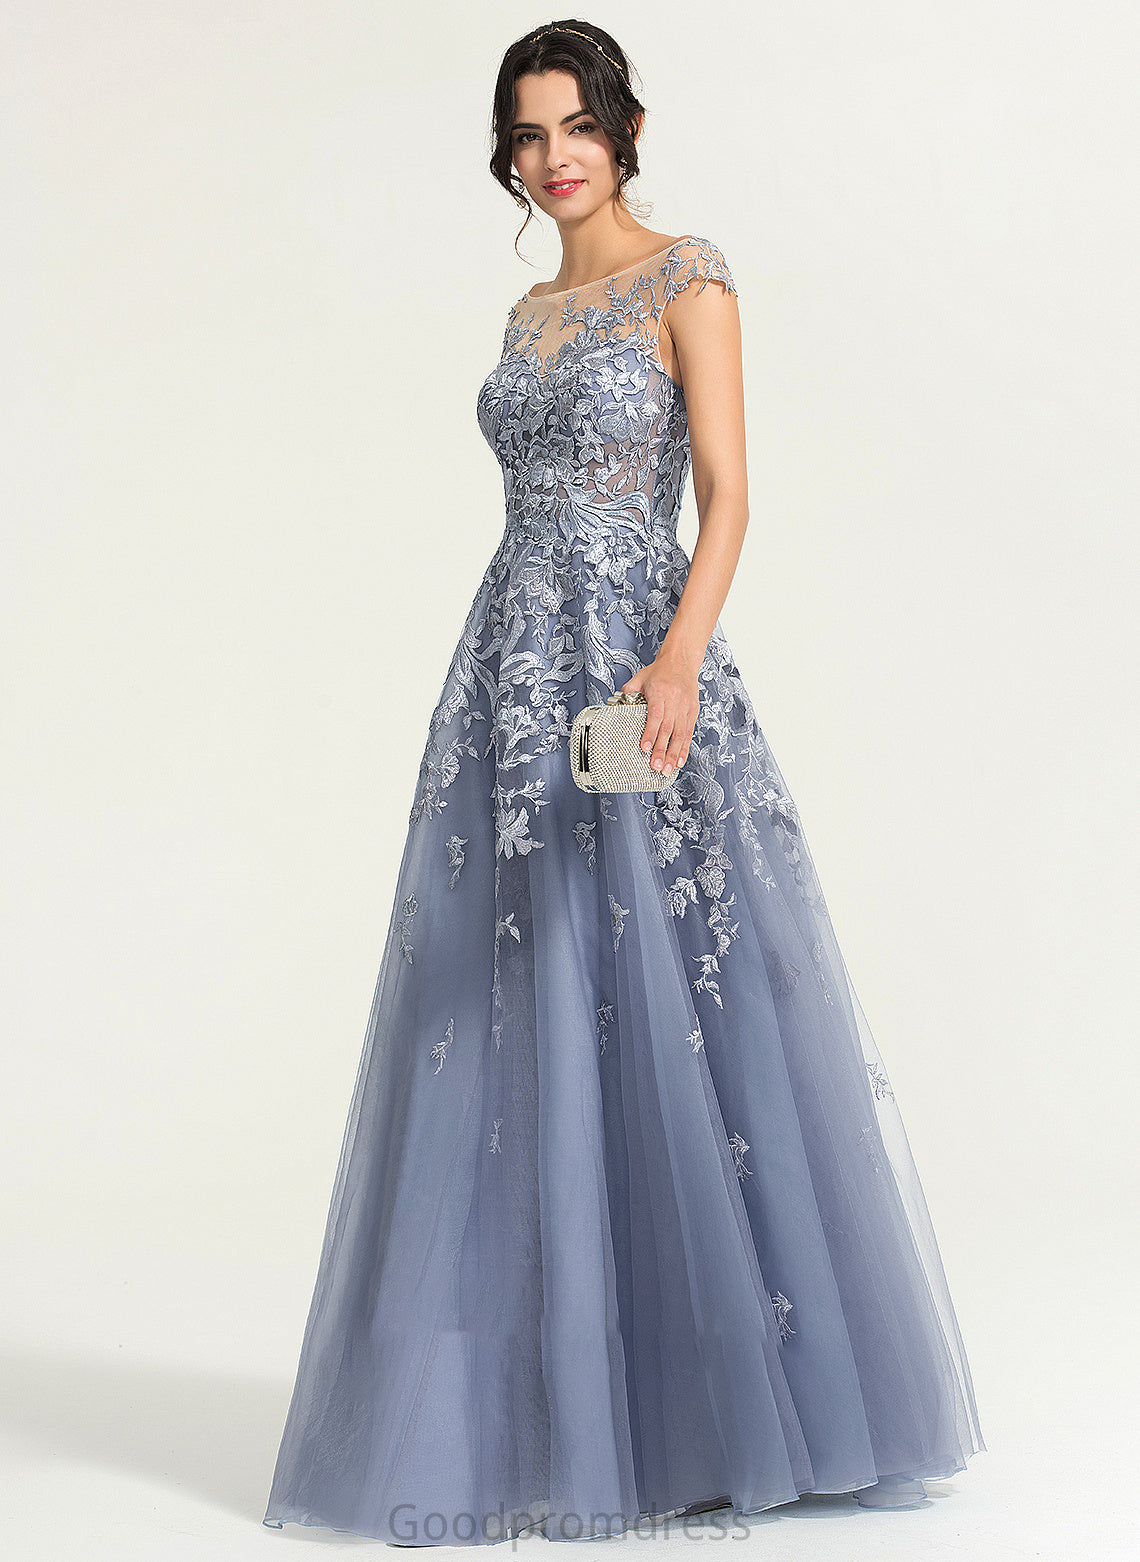 Tulle Floor-Length Scoop Ball-Gown/Princess Prom Dresses Lainey Neck